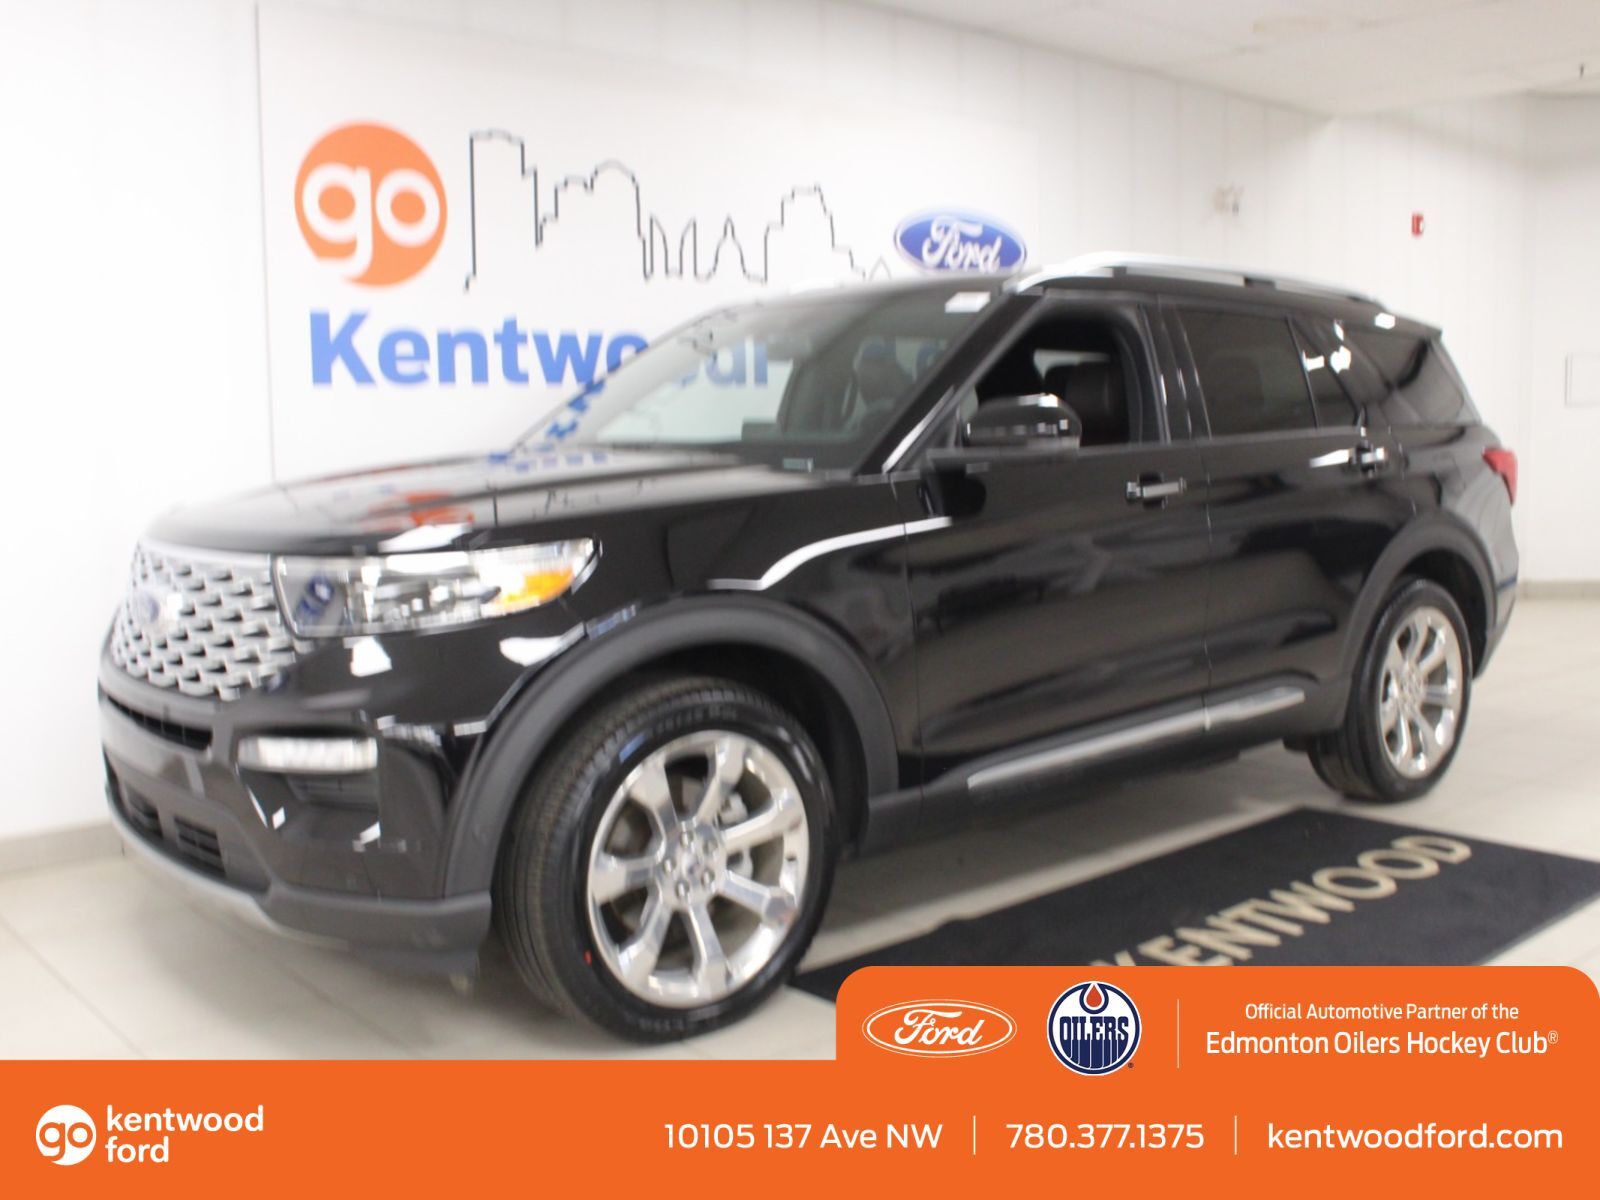 2020 Ford Explorer Platinum | 21s | 4WD | NAV | Heated/Cooled Leather